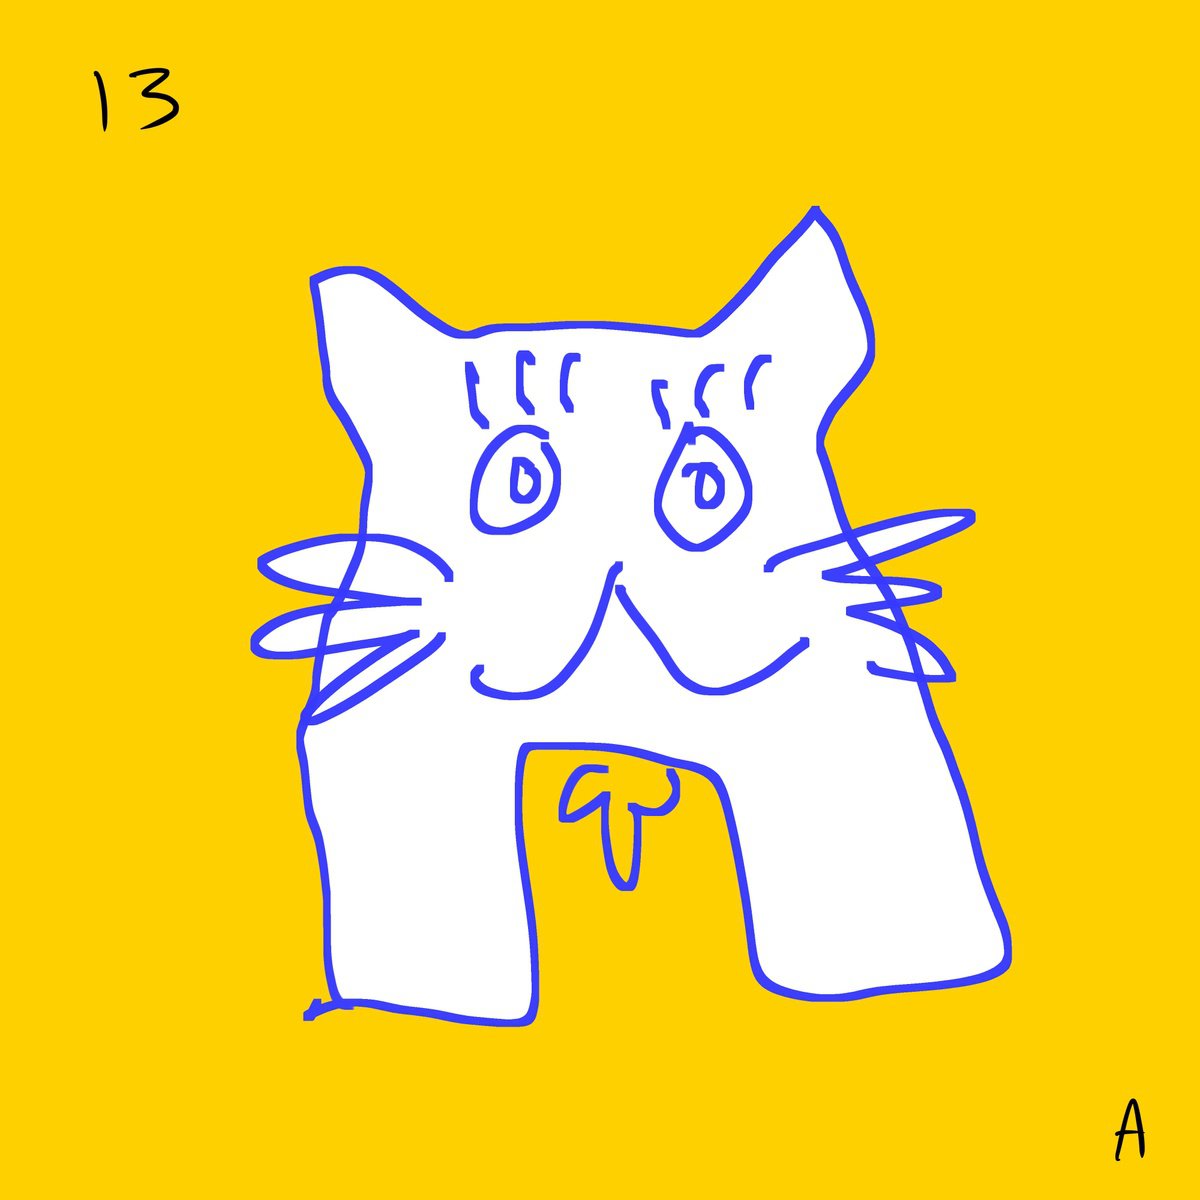 CUTE CAT (yellow crew collection) by ngel Rivas